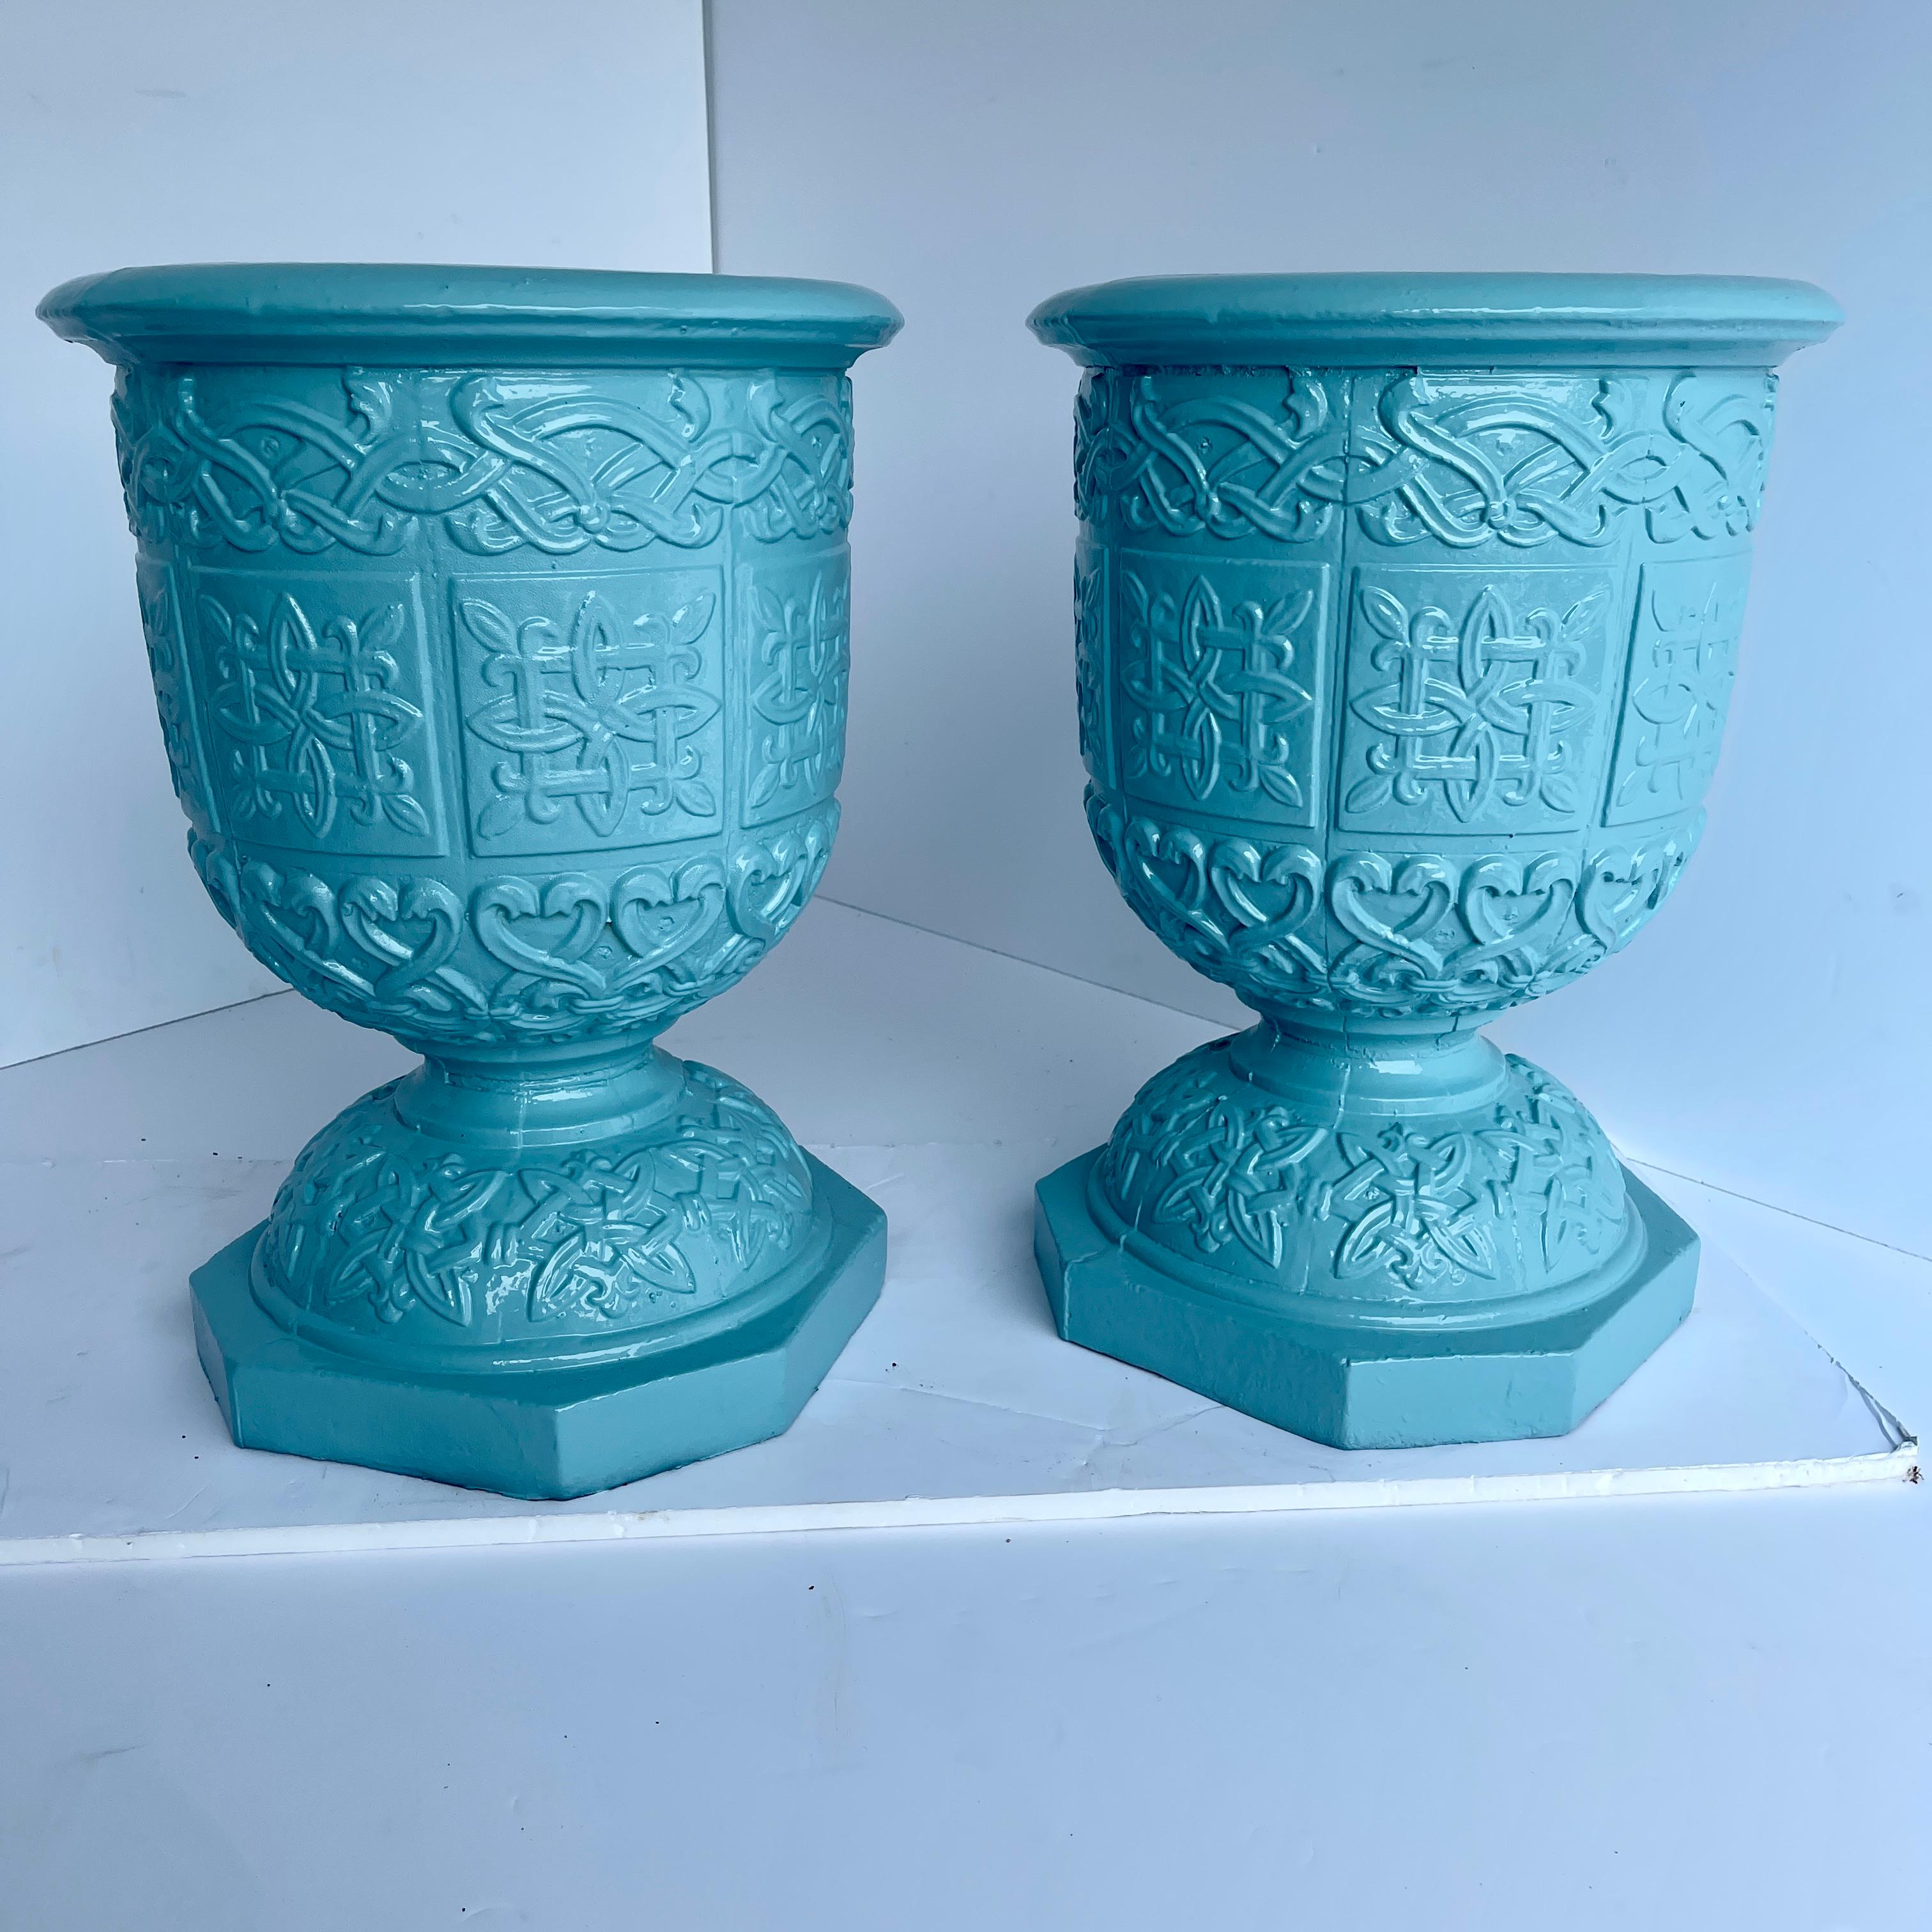 Large pair of turquoise powder-coated cast iron garden urns.